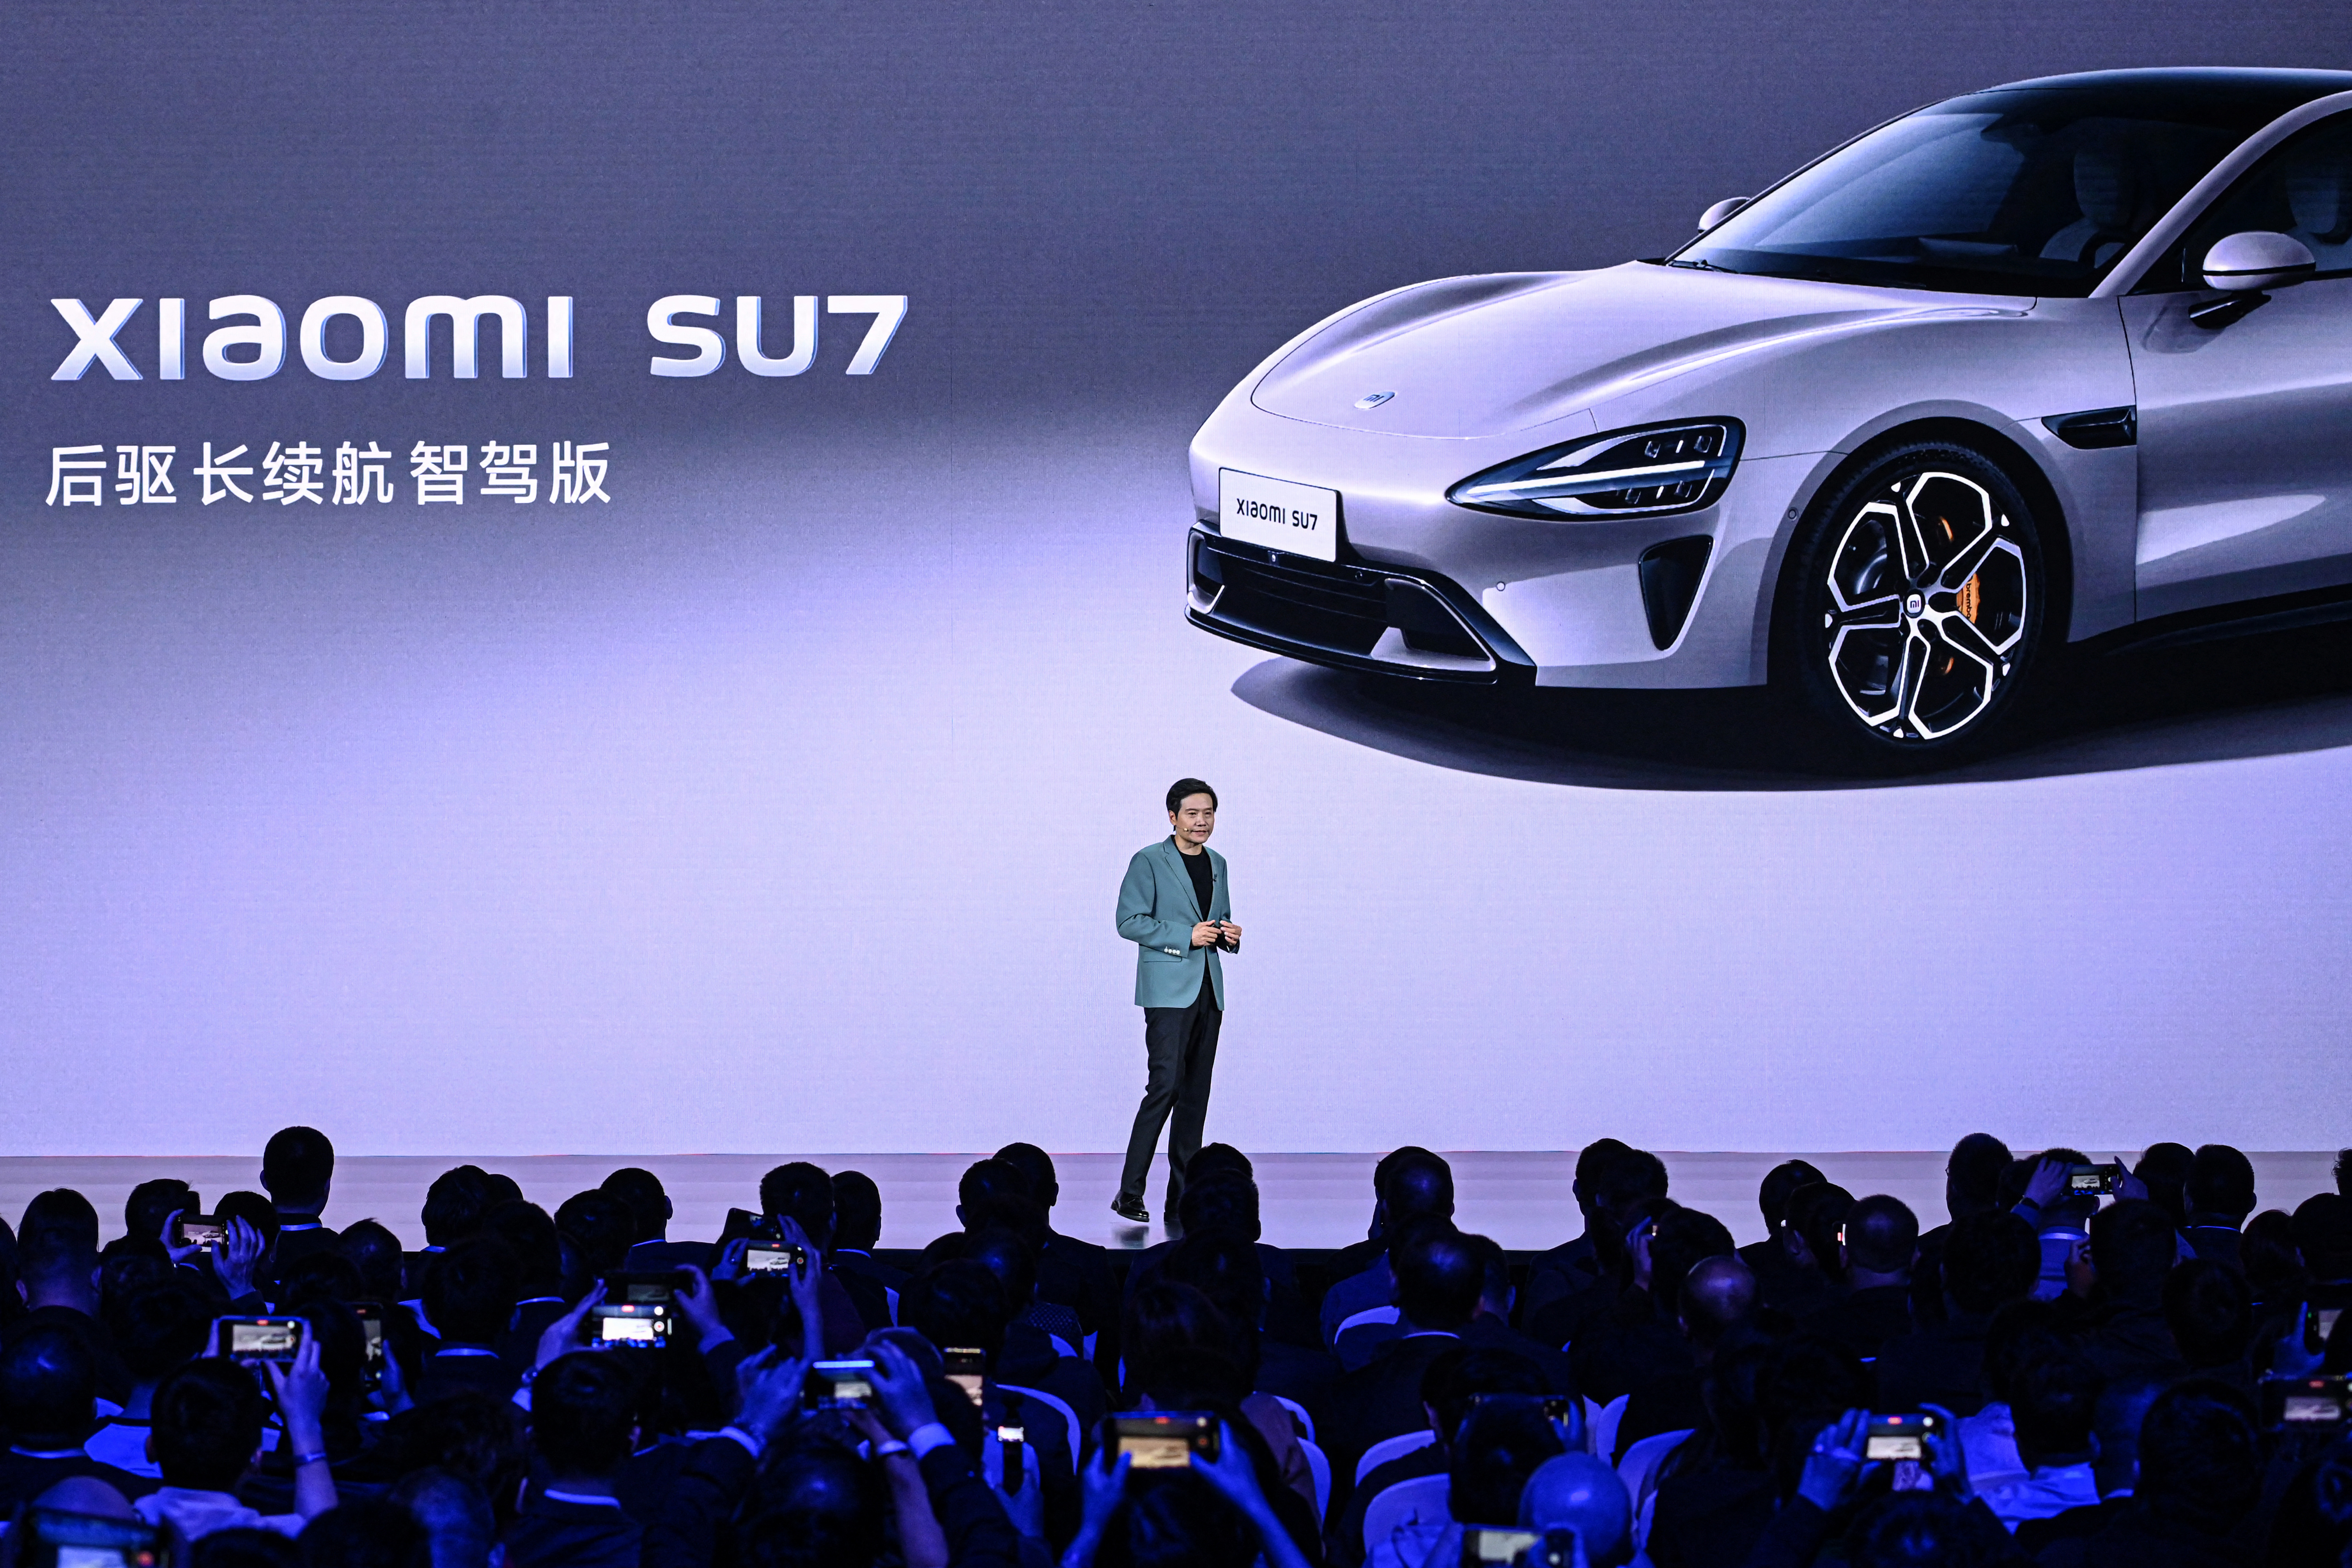 The EV was formally unveiled in China